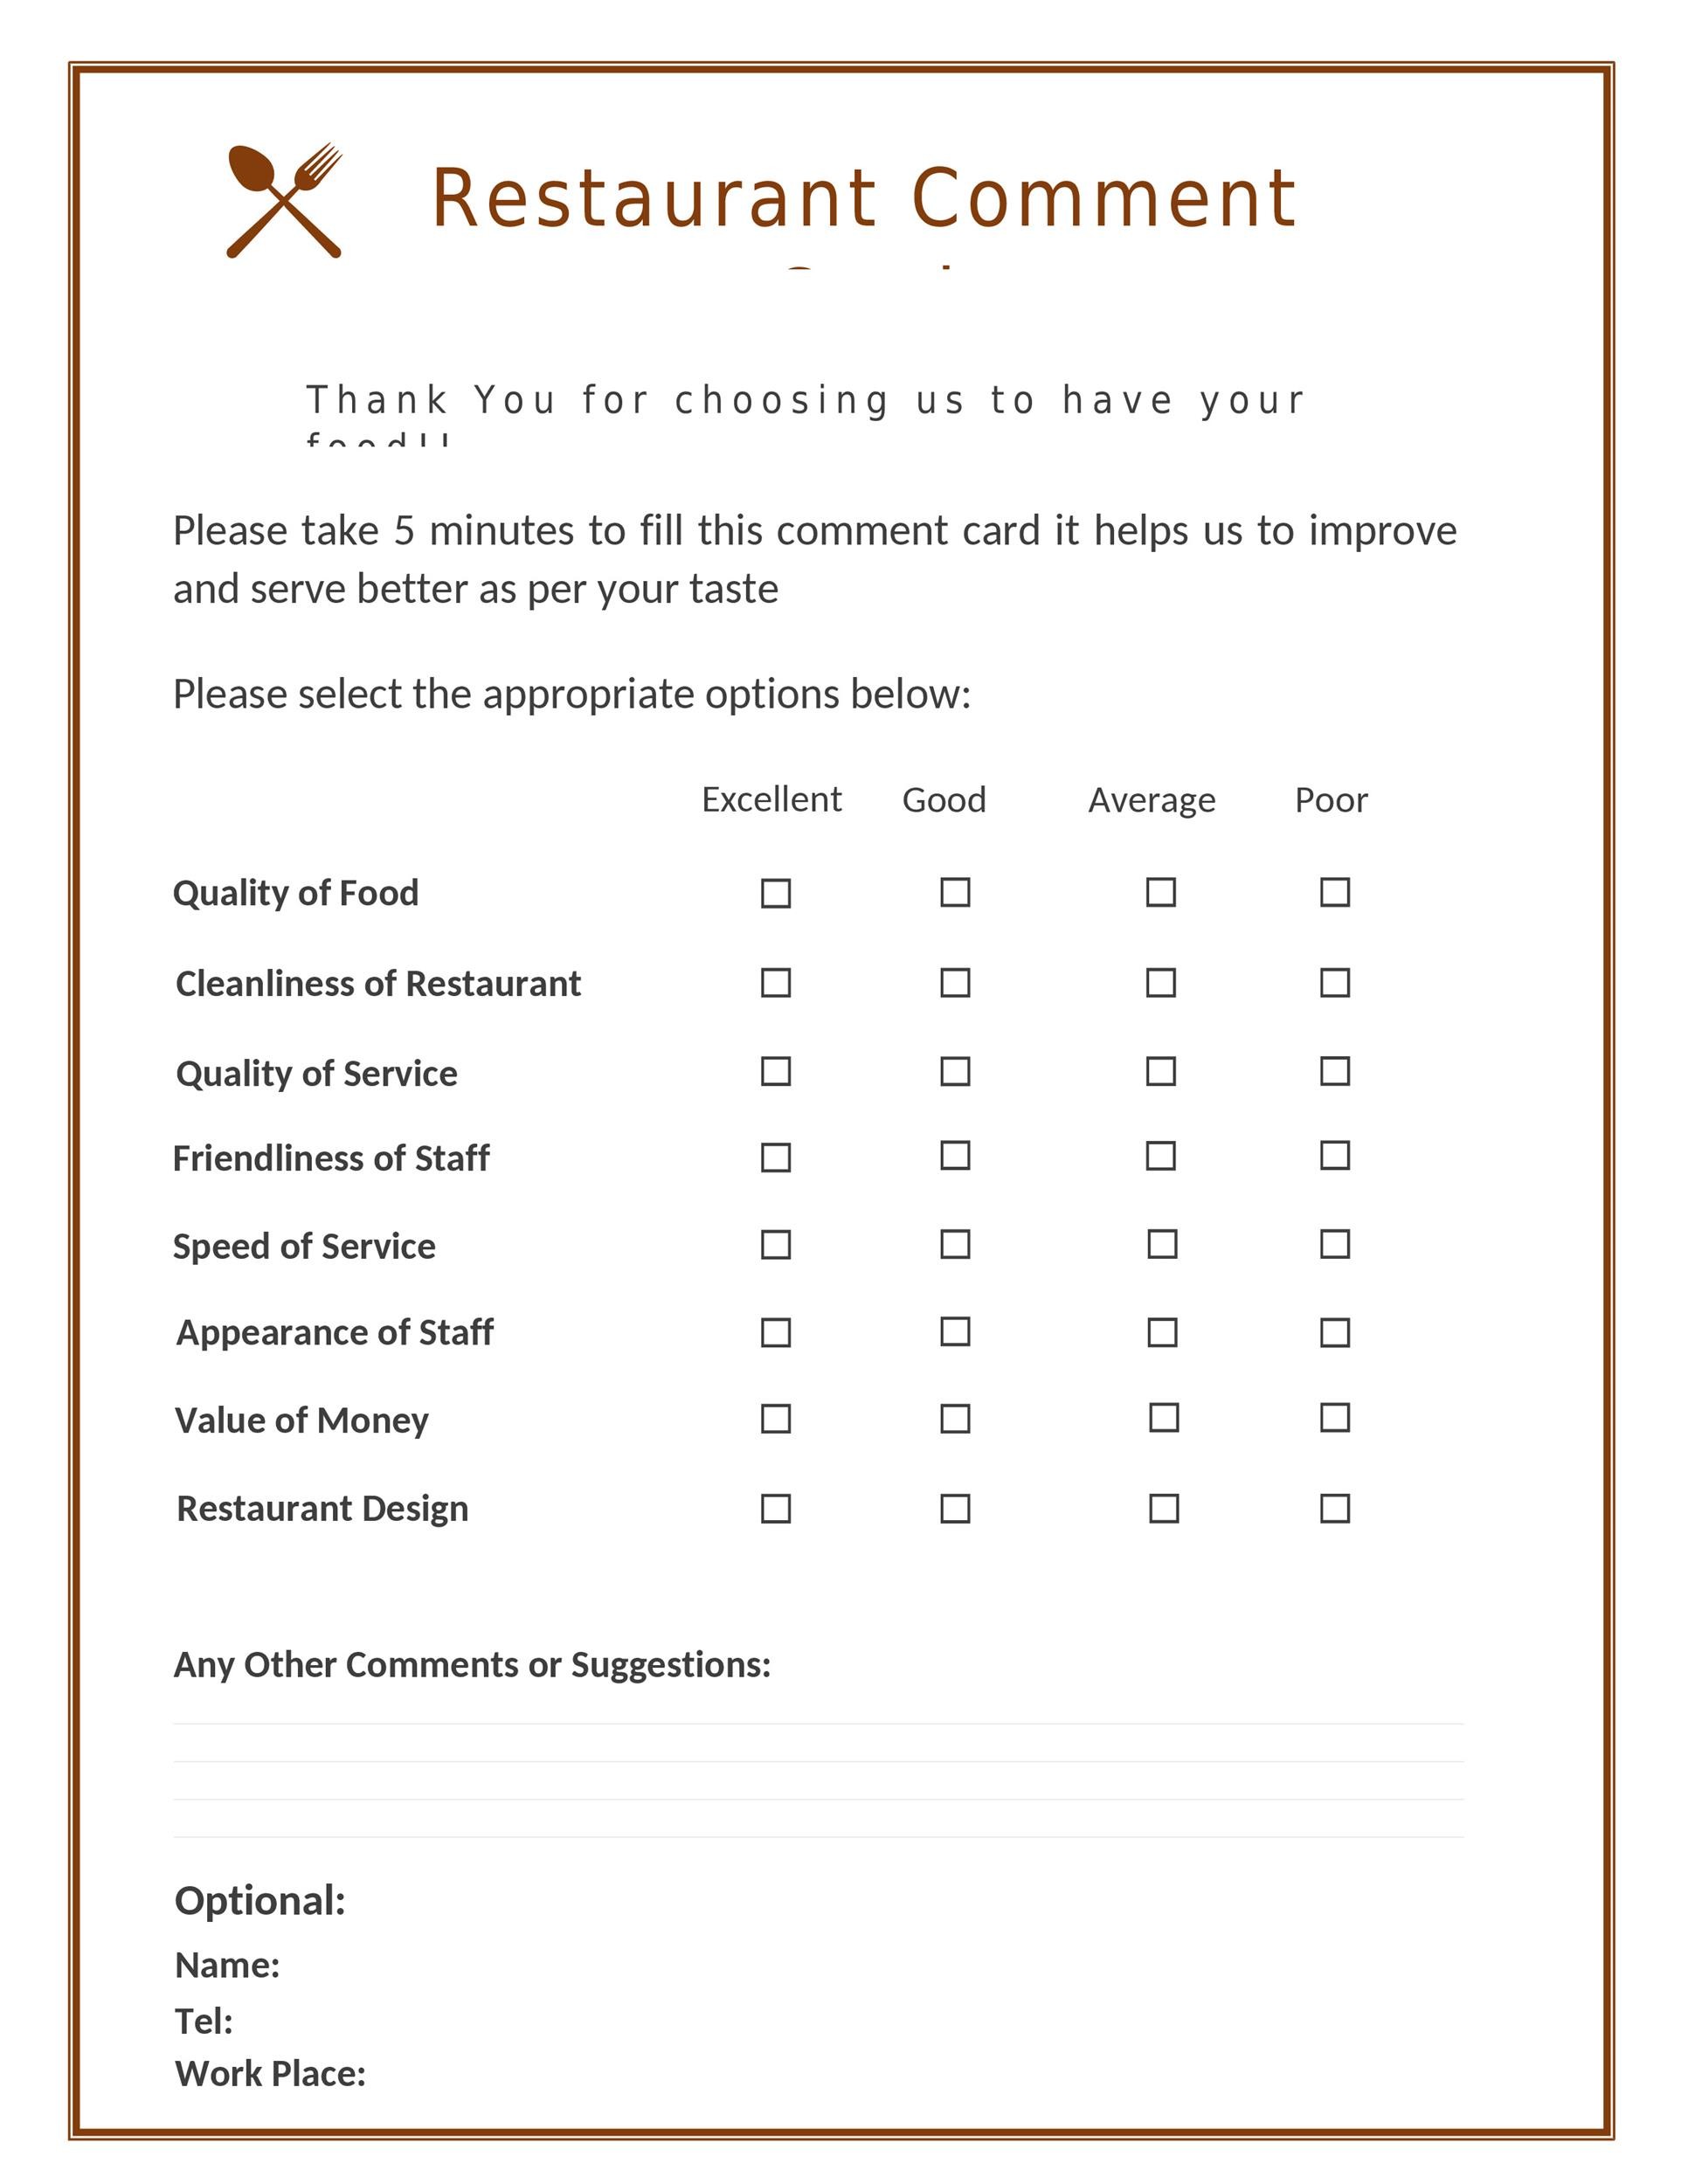 Guest Comment Card Design - 50 Printable Comment Card Feedback Form Templat...